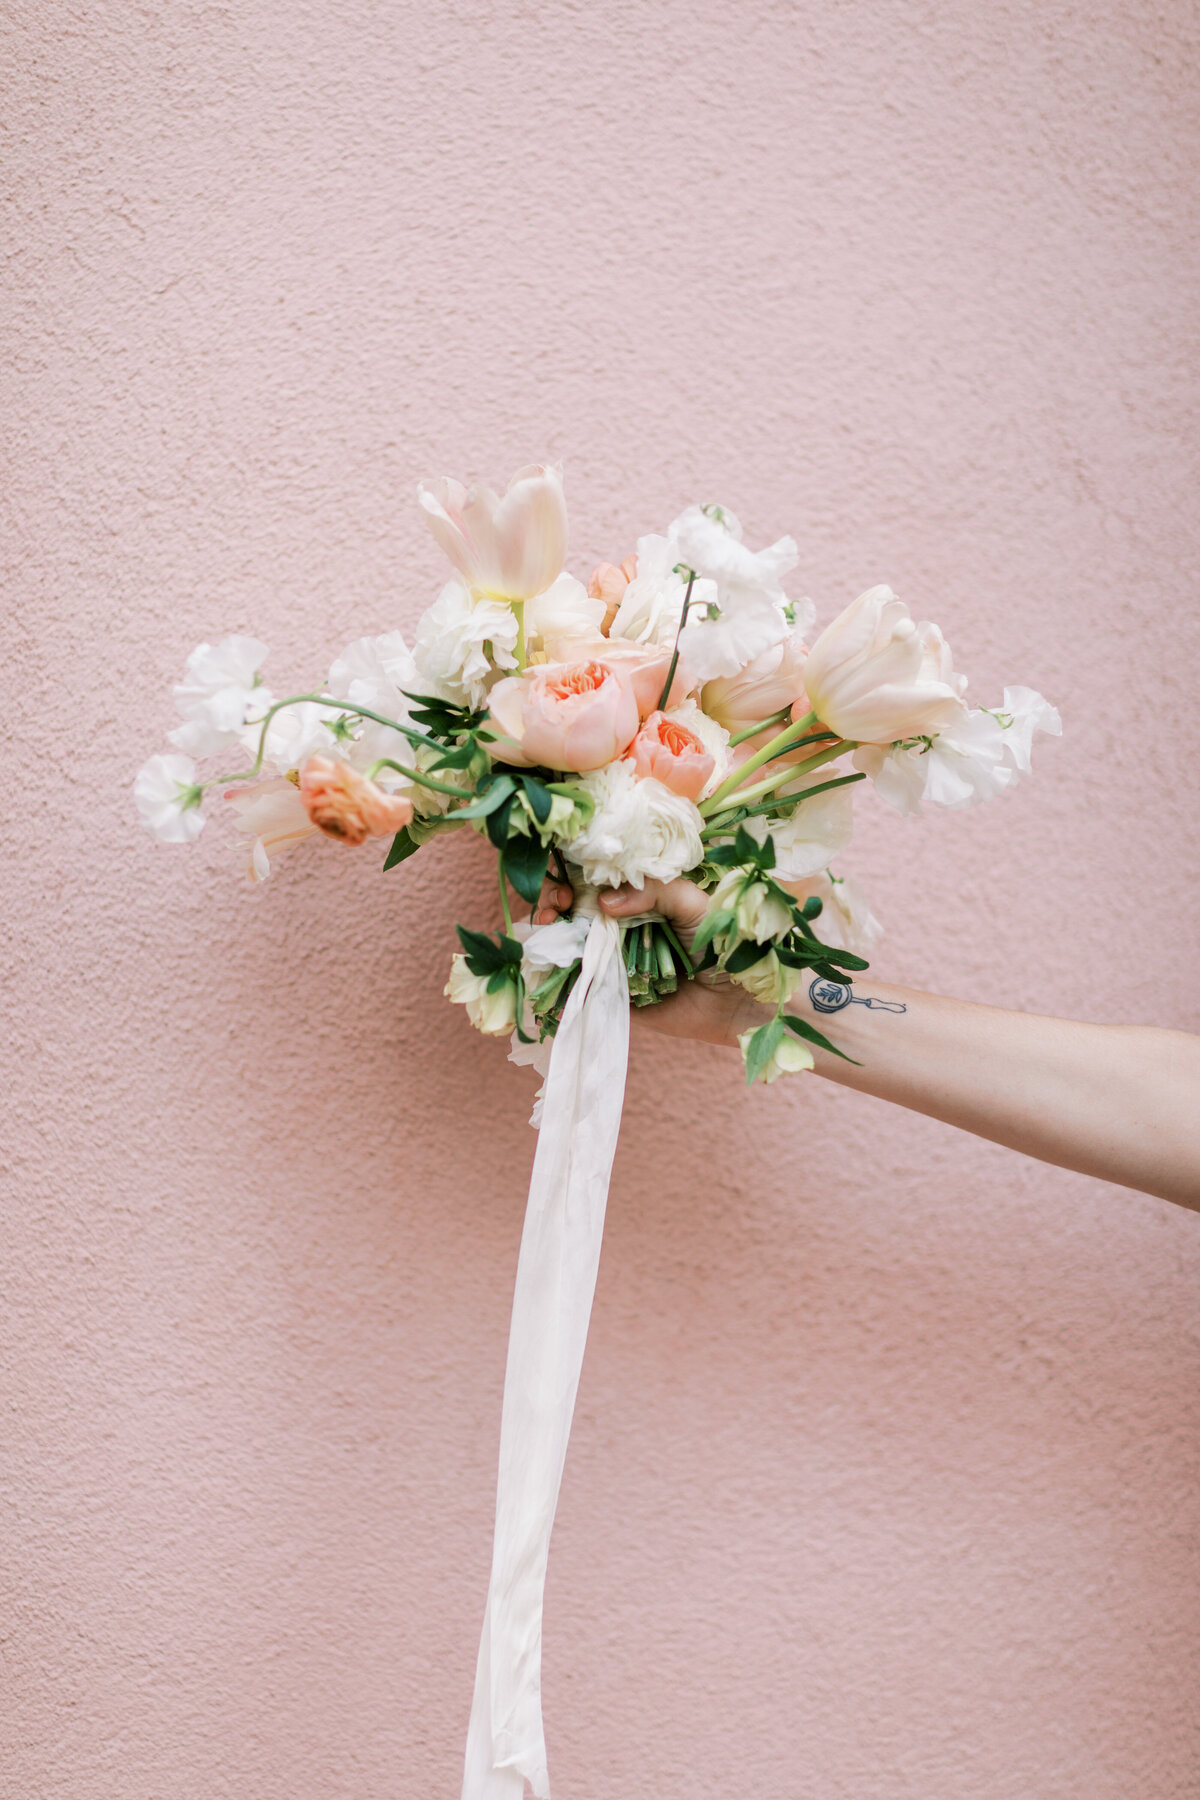 White and pink wedding bouquet with a long pale pink ribbon dangling being held by an arm in front of a pastel pink wall on Rainbow Row in Charleston